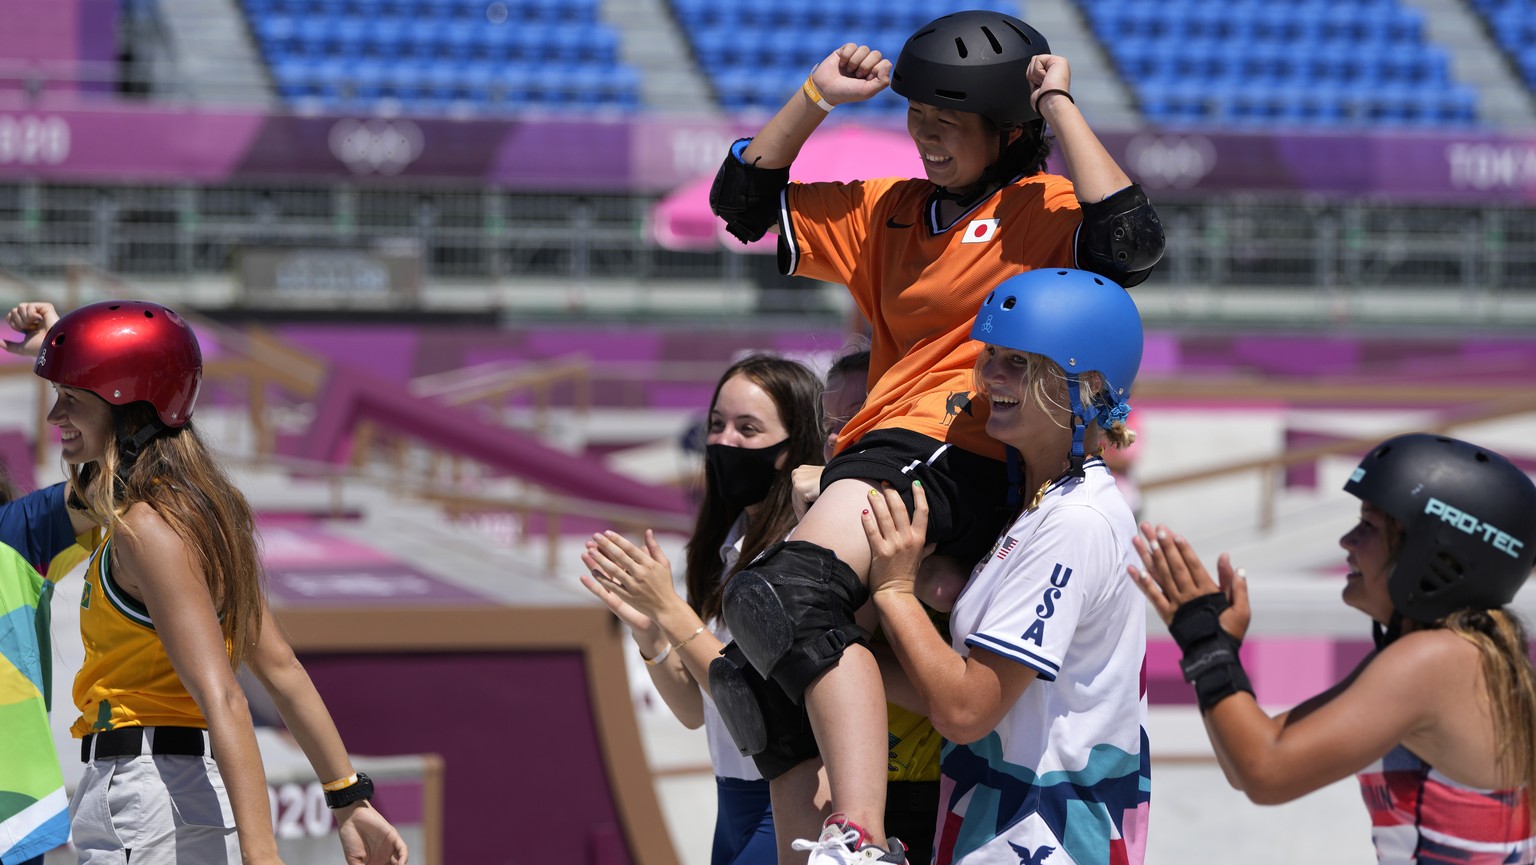 Misugu Okamoto of Japan is carried off after her run in the women&#039;s park skateboarding finals at the 2020 Summer Olympics, Wednesday, Aug. 4, 2021, in Tokyo, Japan. (AP Photo/Ben Curtis)